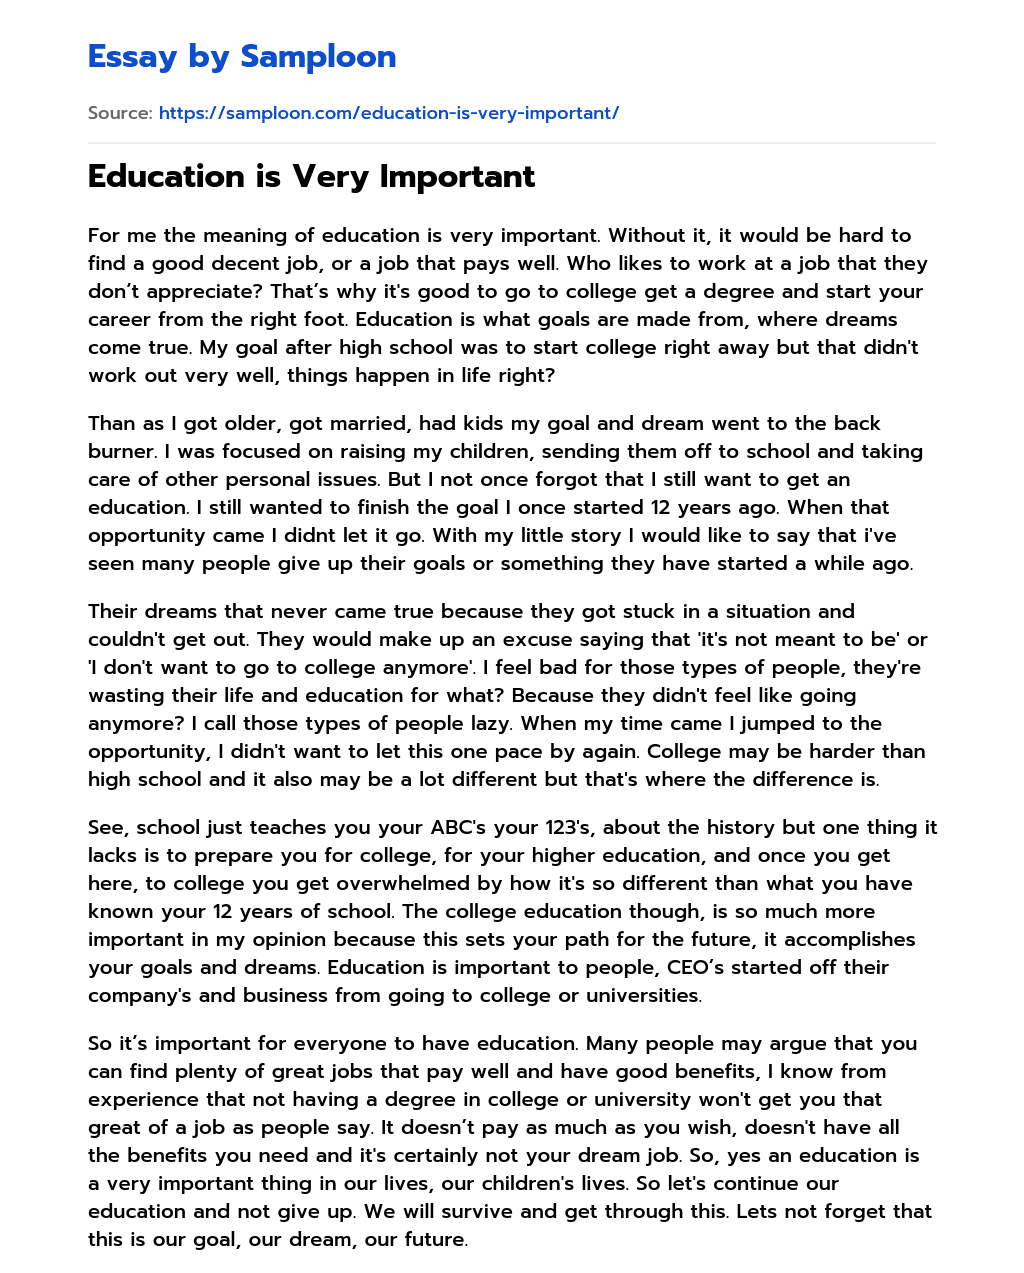 Education is Very Important essay